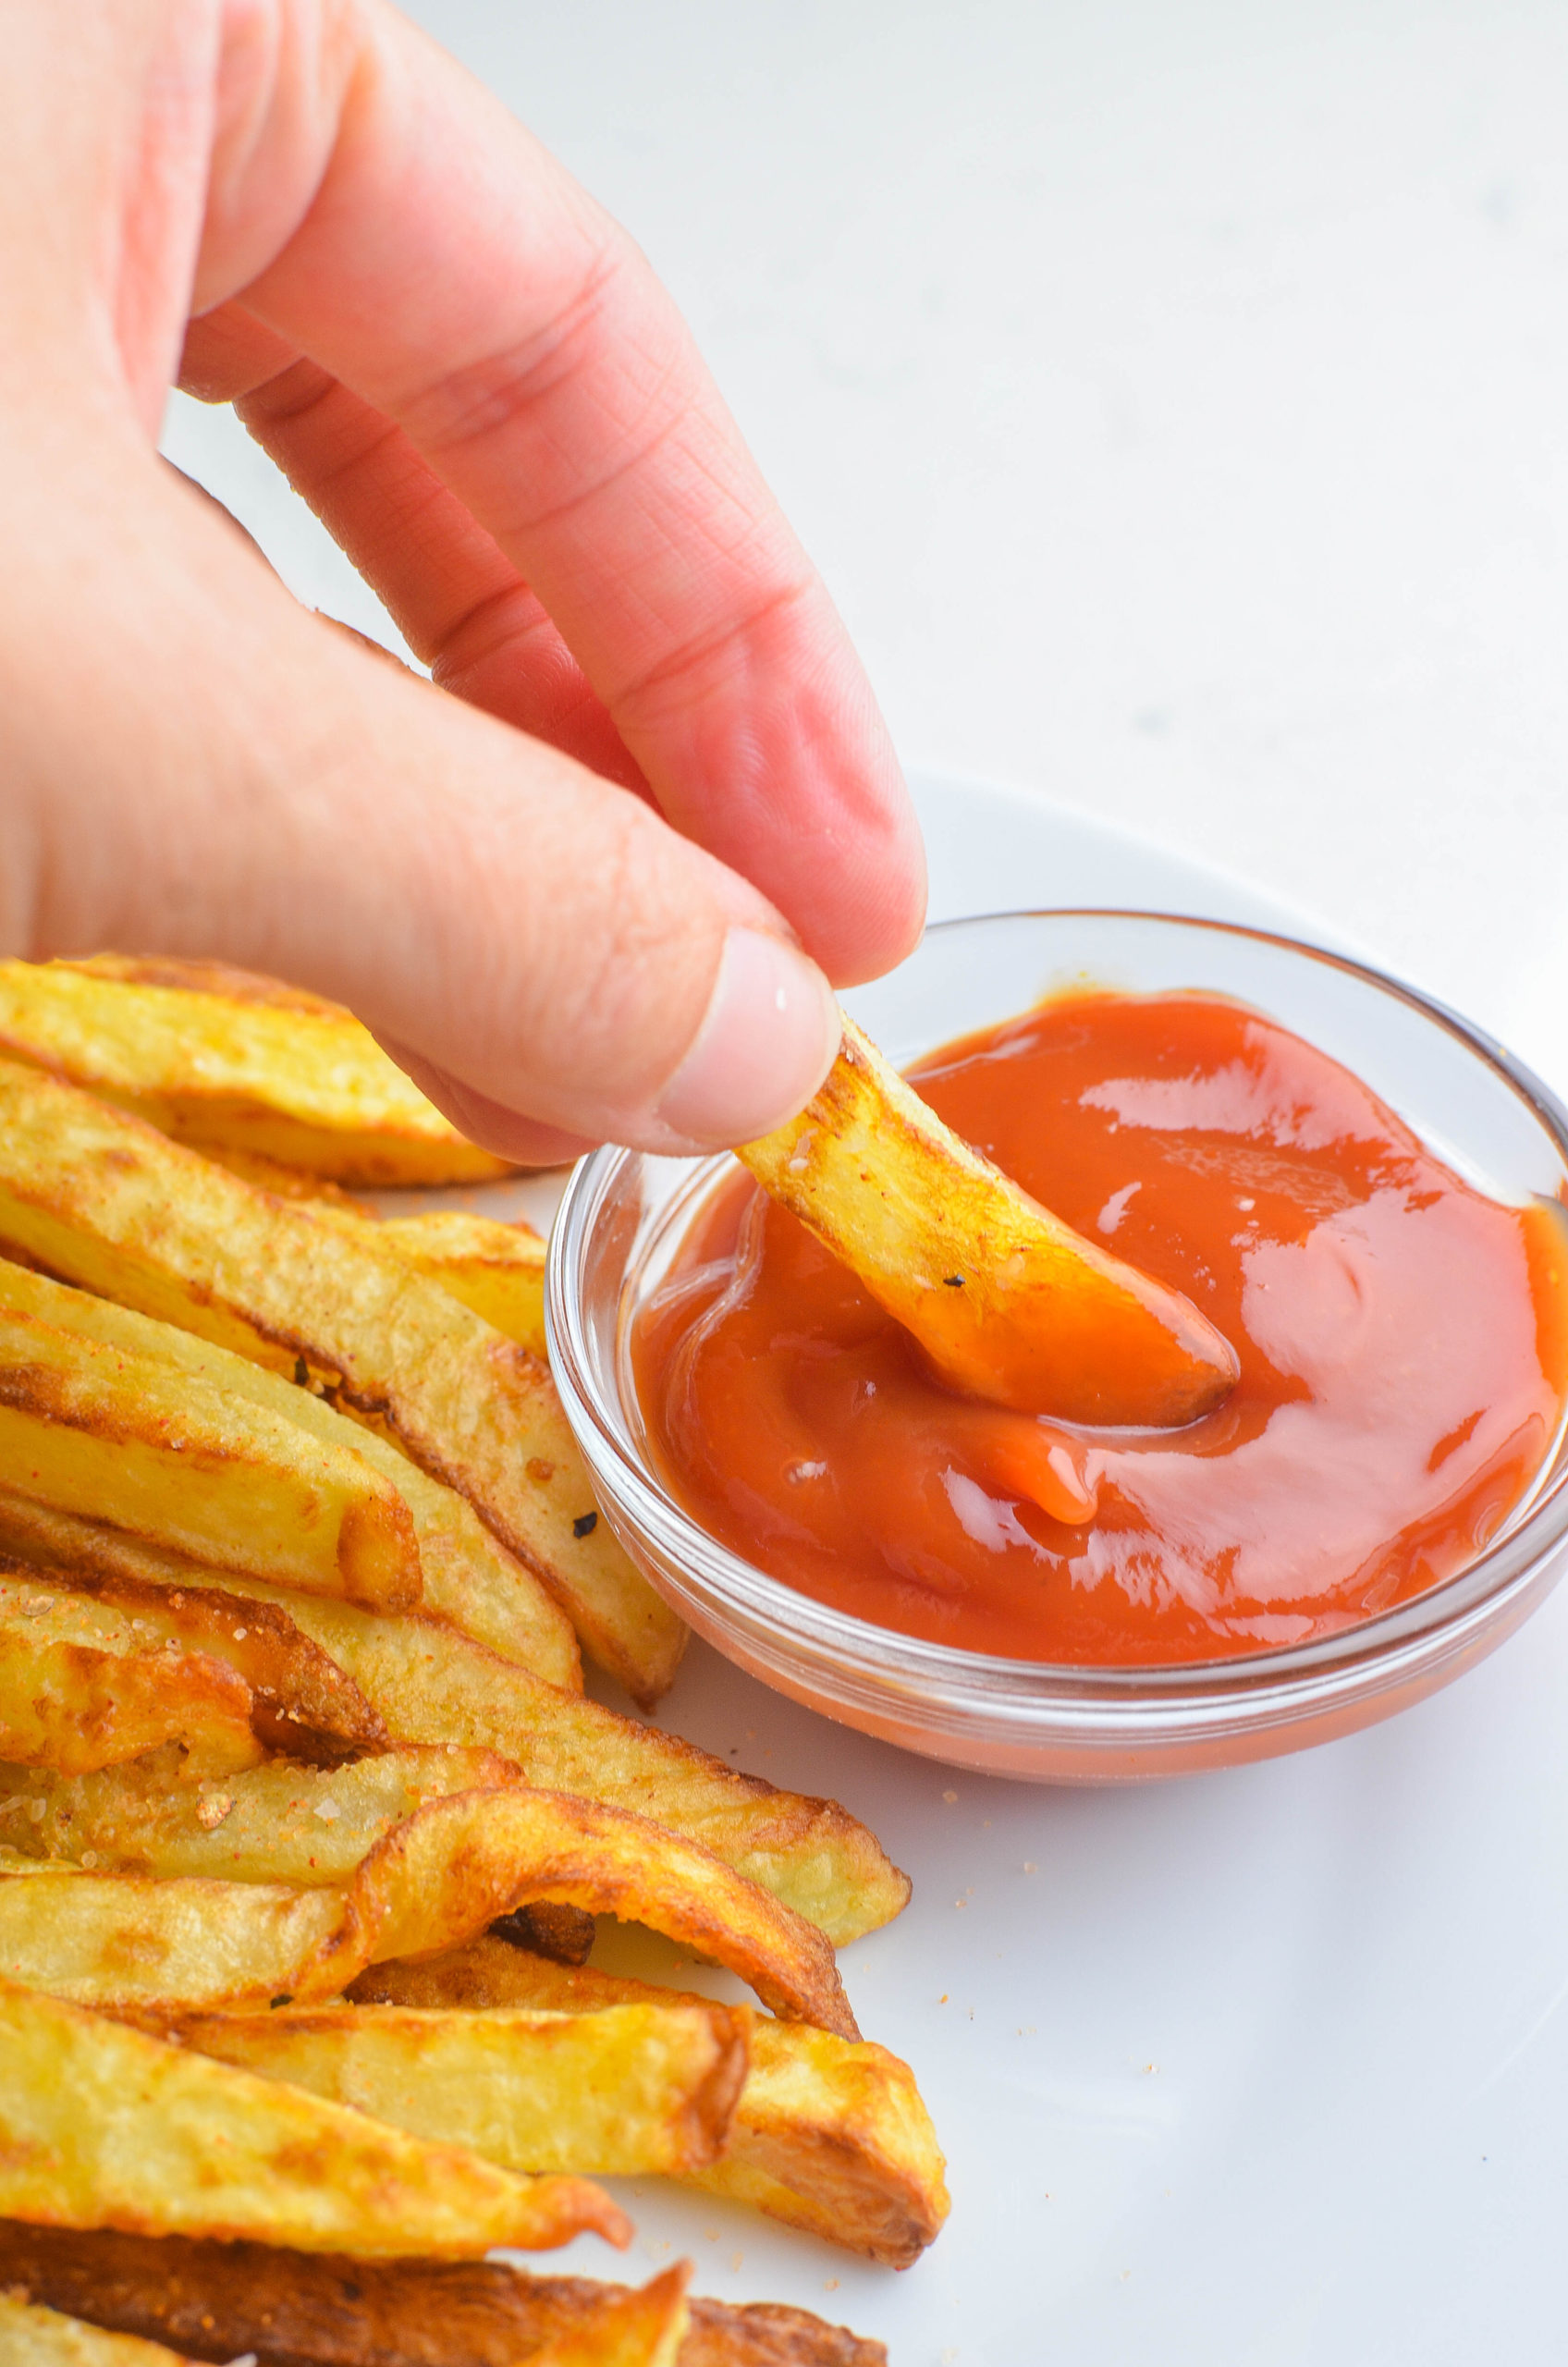 Dipping air fried french fries in ketchup